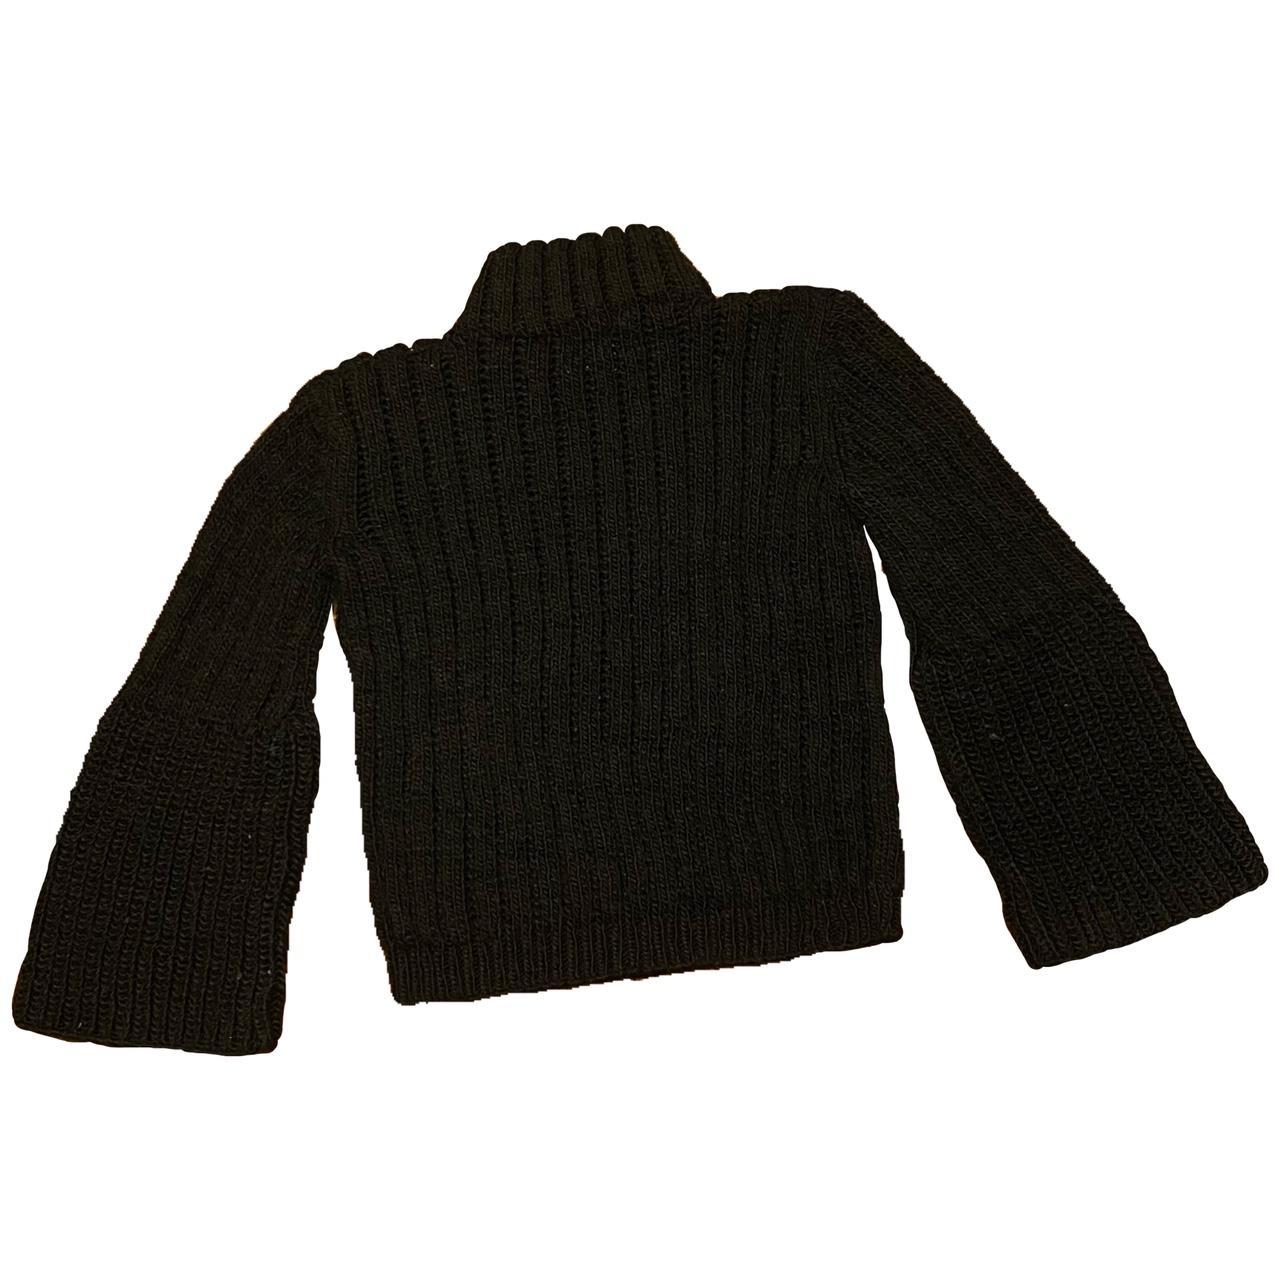 Super cute tach black knitted sweater with flare... - Depop